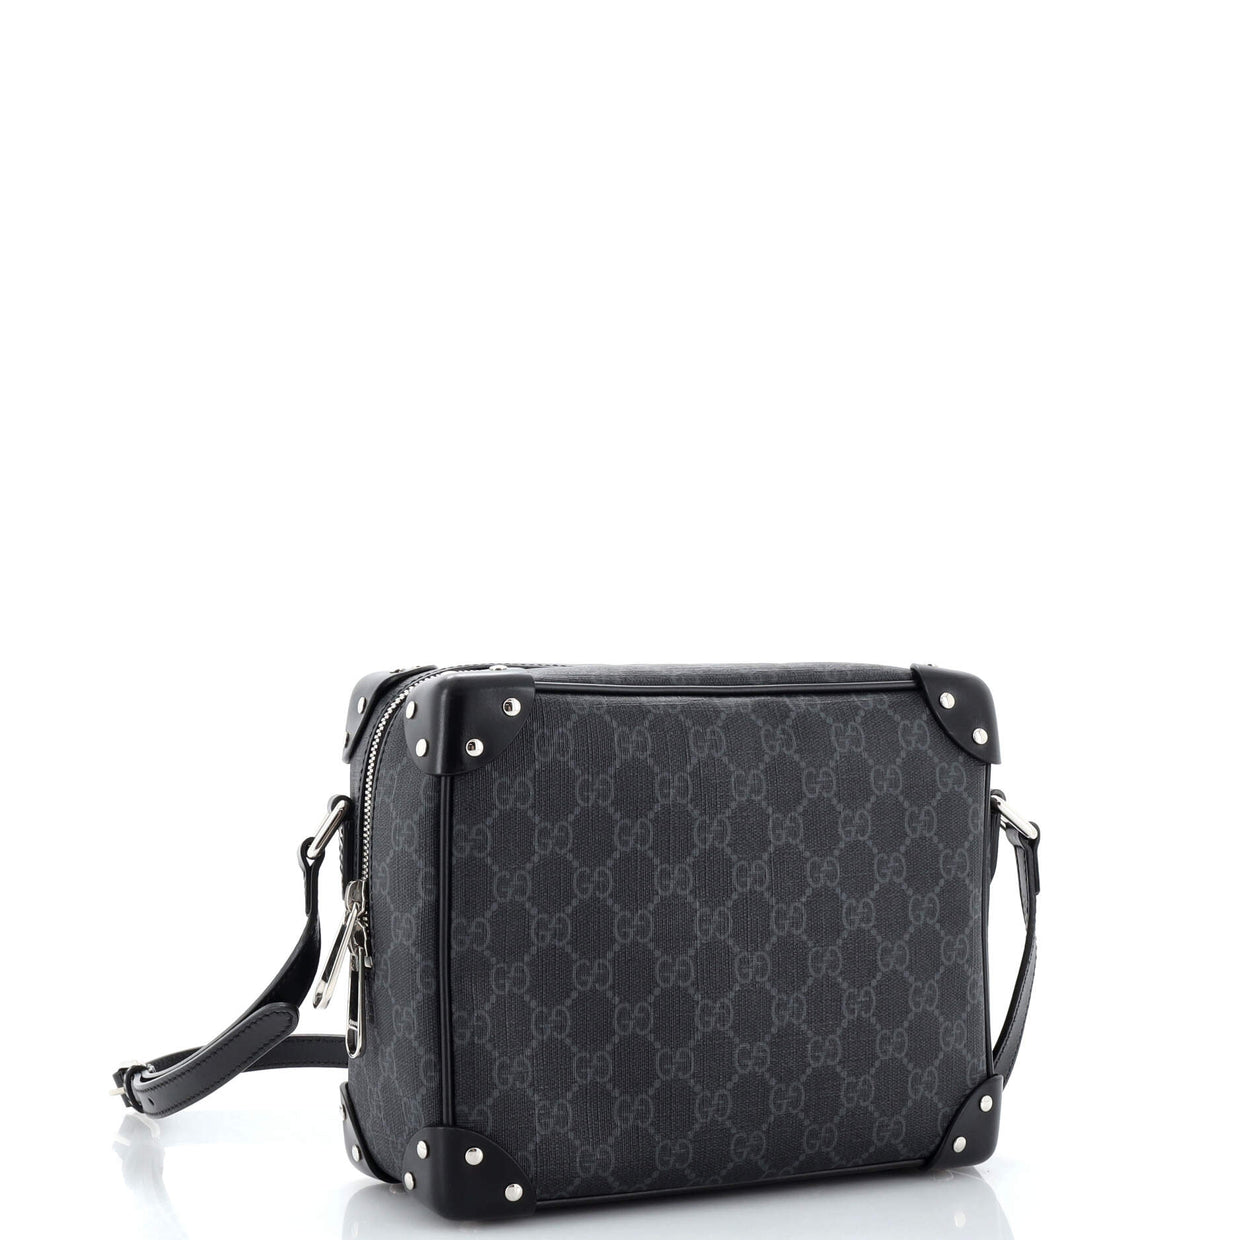 Gucci Trunk Shoulder Bag GG Coated Canvas with Studded Leather Black ...